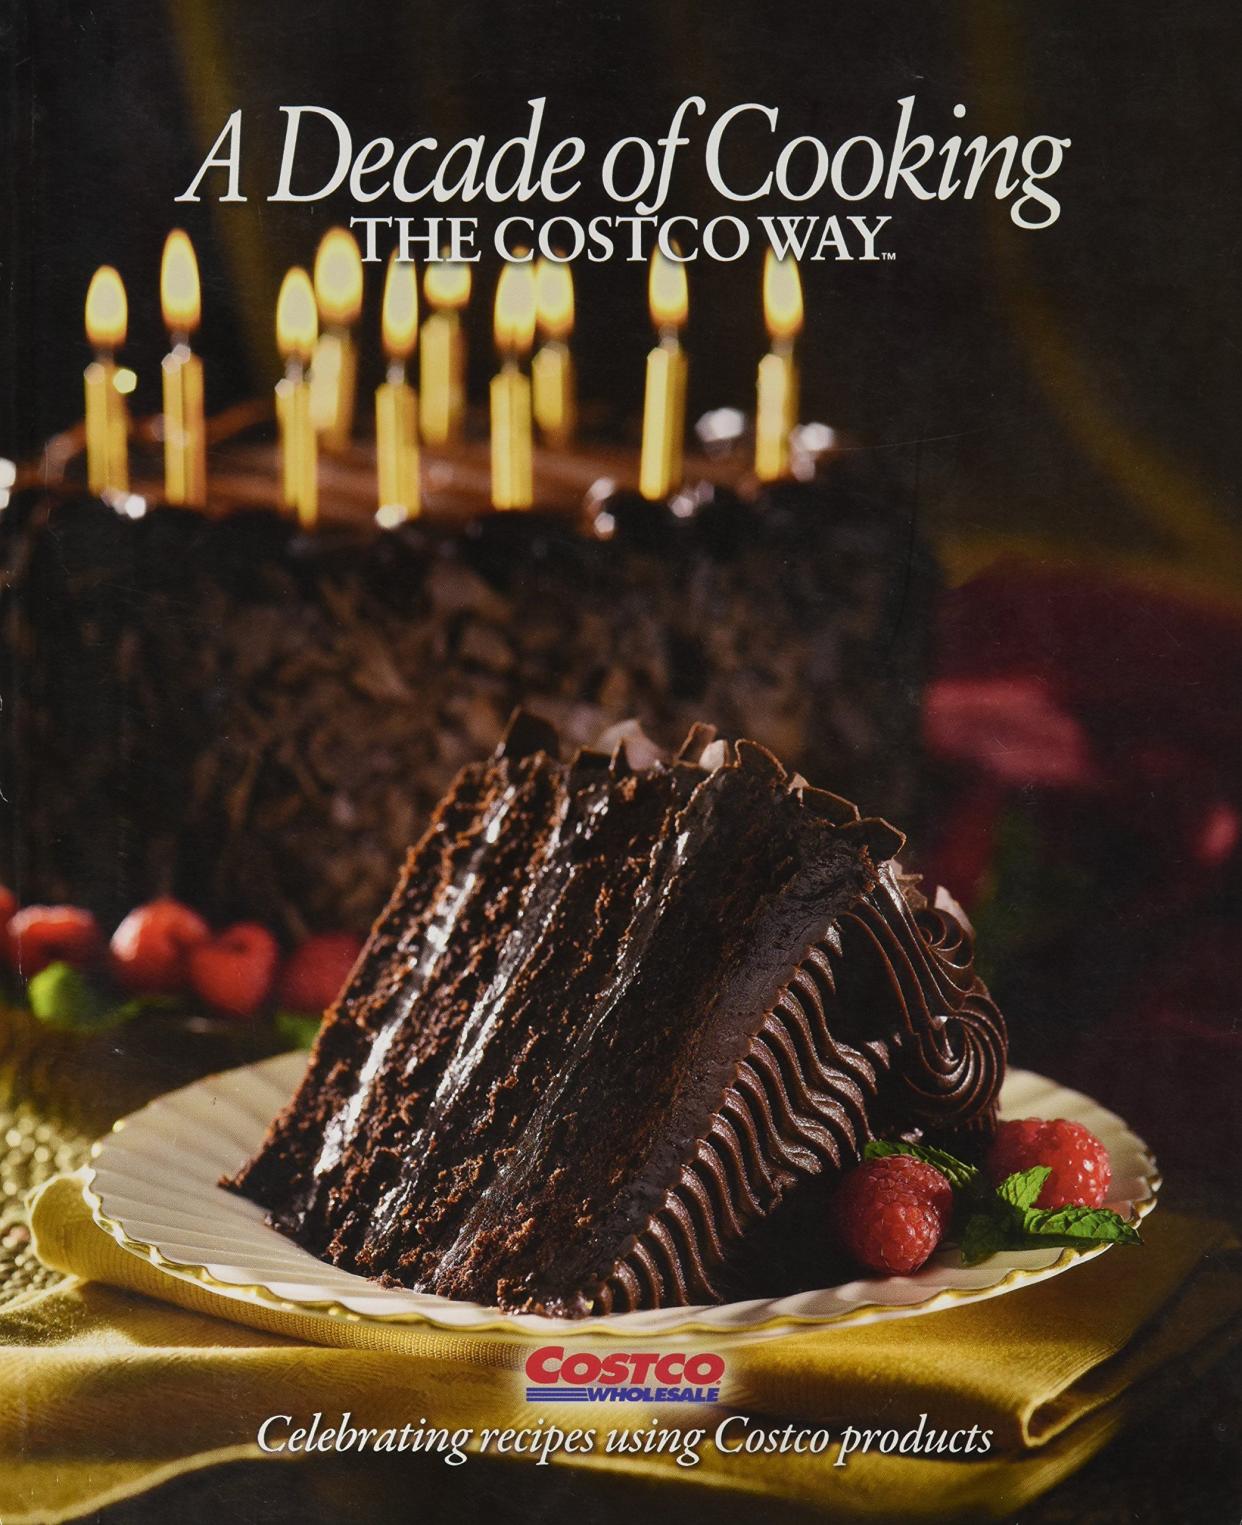 'A Decade of Cooking, The Costco Way'